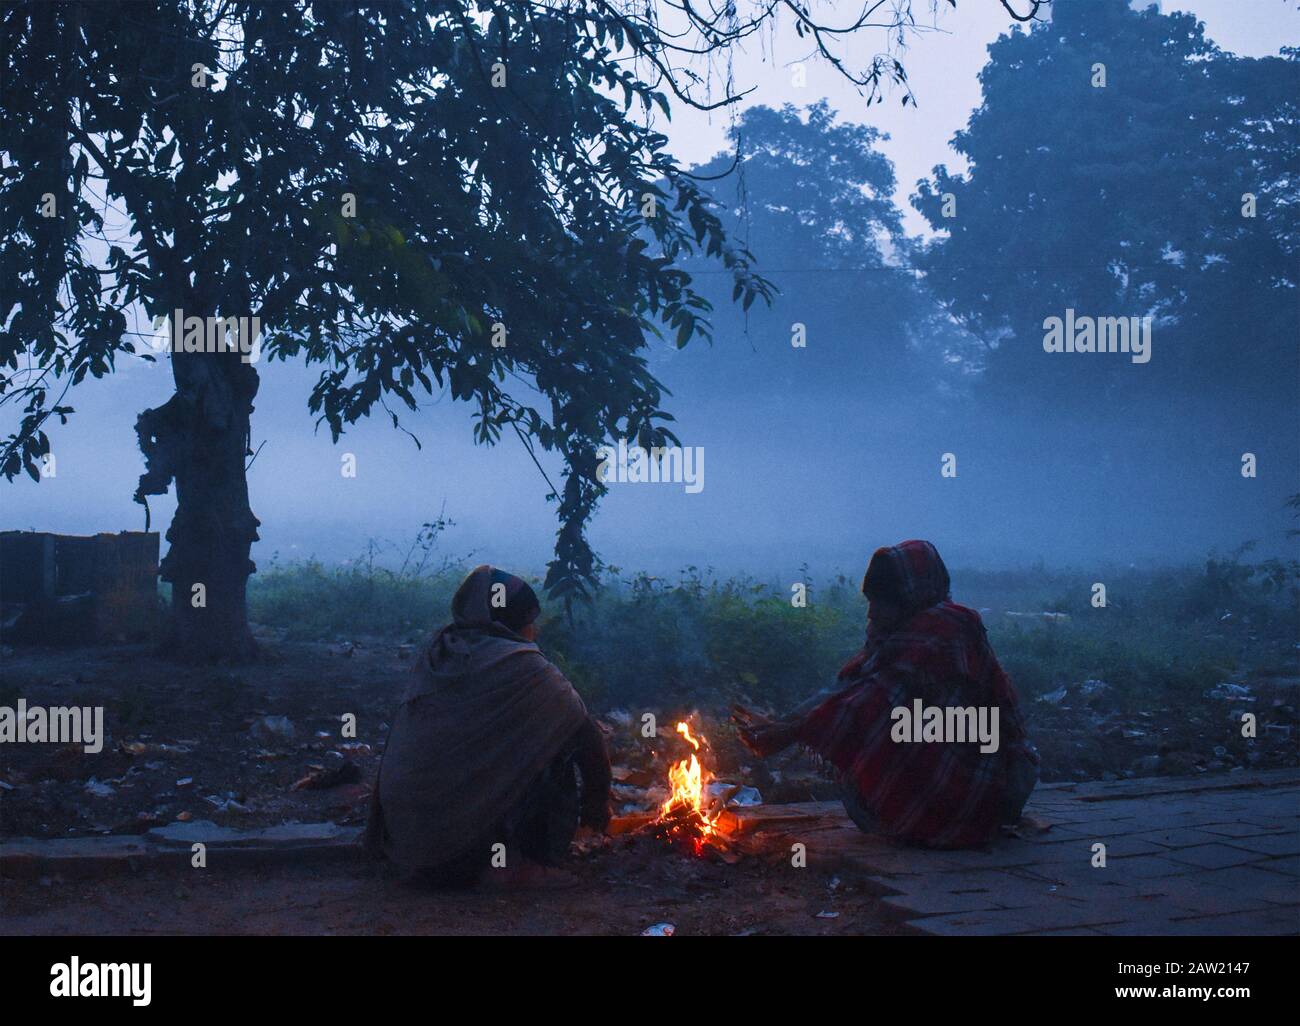 Peoples are warm himself by fire on the winter cold morning in Kolkata, India. Stock Photo